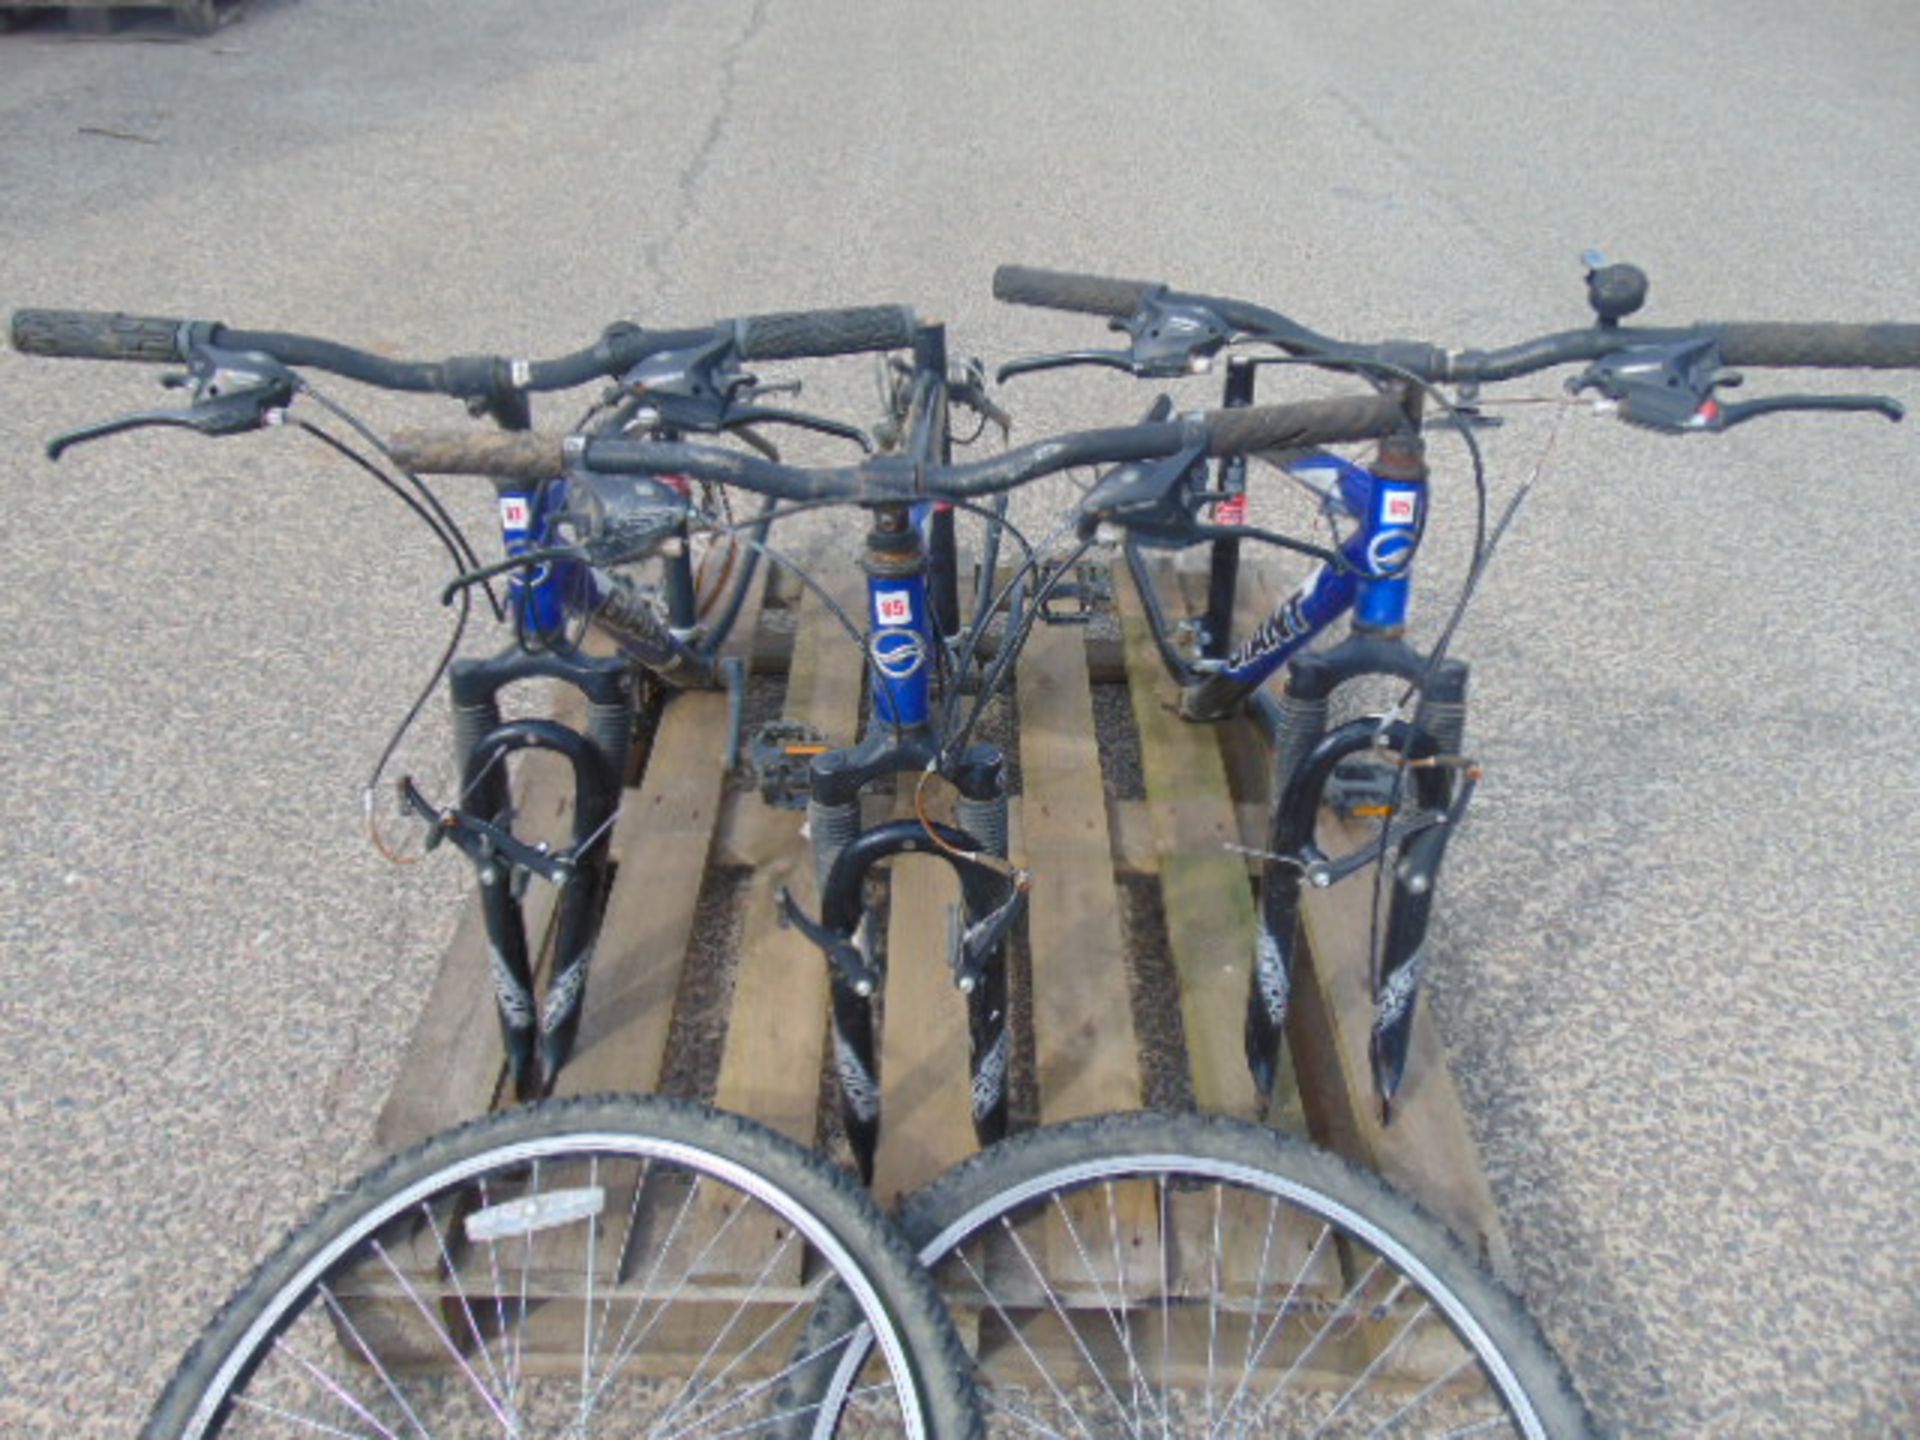 3 x Giant Alluxx 6000 Series Bike Frames with Forks, 2 x wheels etc - Image 5 of 9